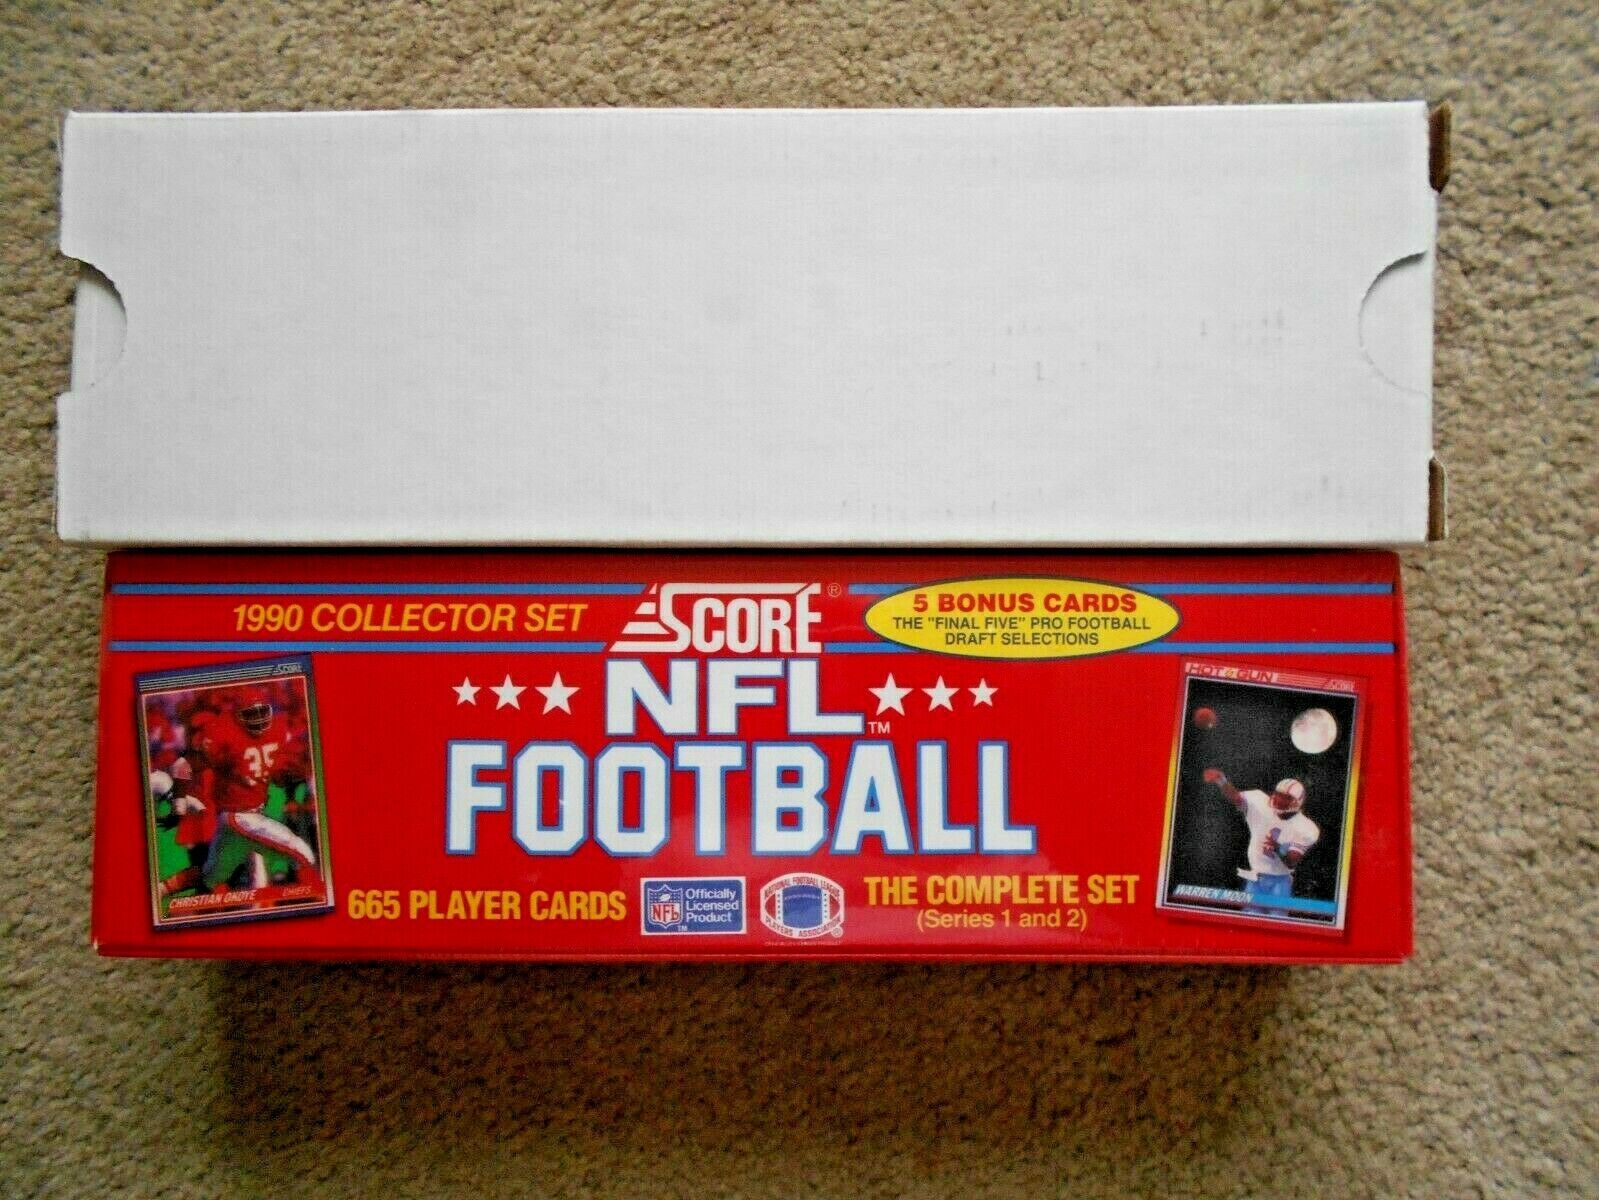 Score NFL Football 1990 Collector Set,  665 Player Cards #99600